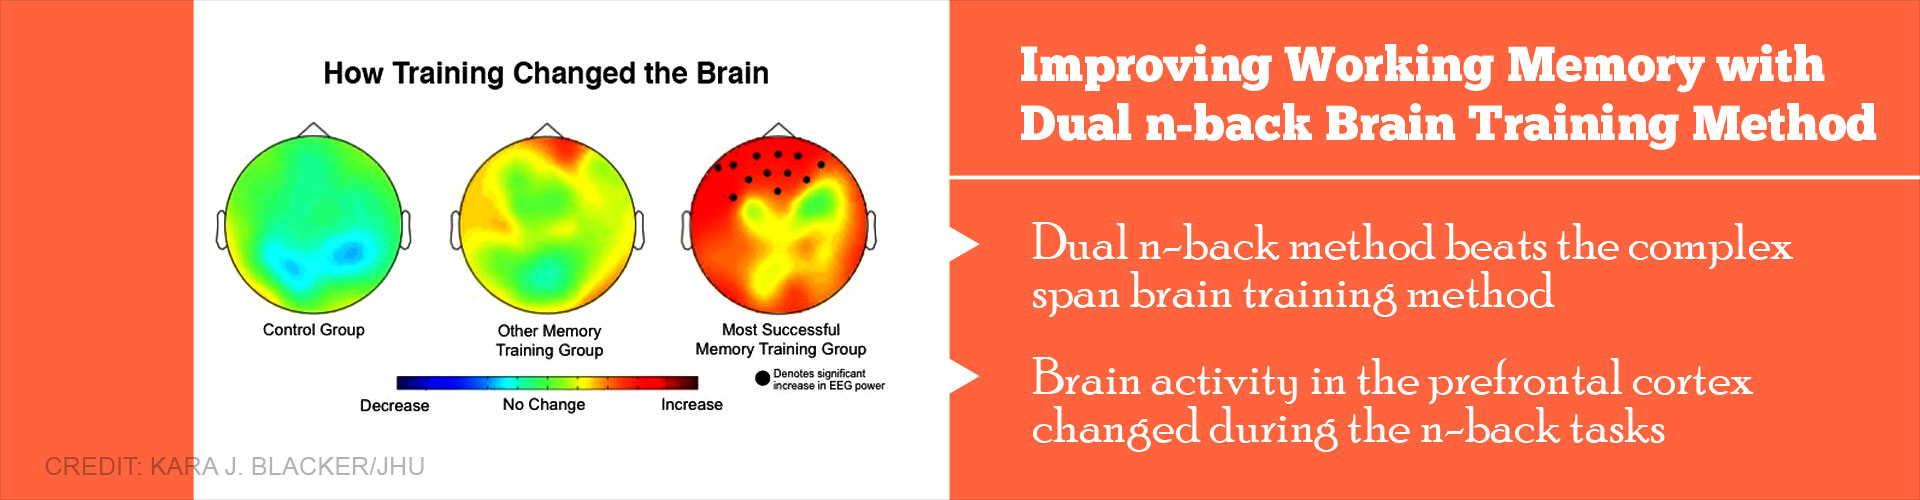 Improving working memory with dual n-back brain training method
- dual n-back method beats the complex span brain training method
- Brain activity in the prefrontal cortex changed during the n-back tasks